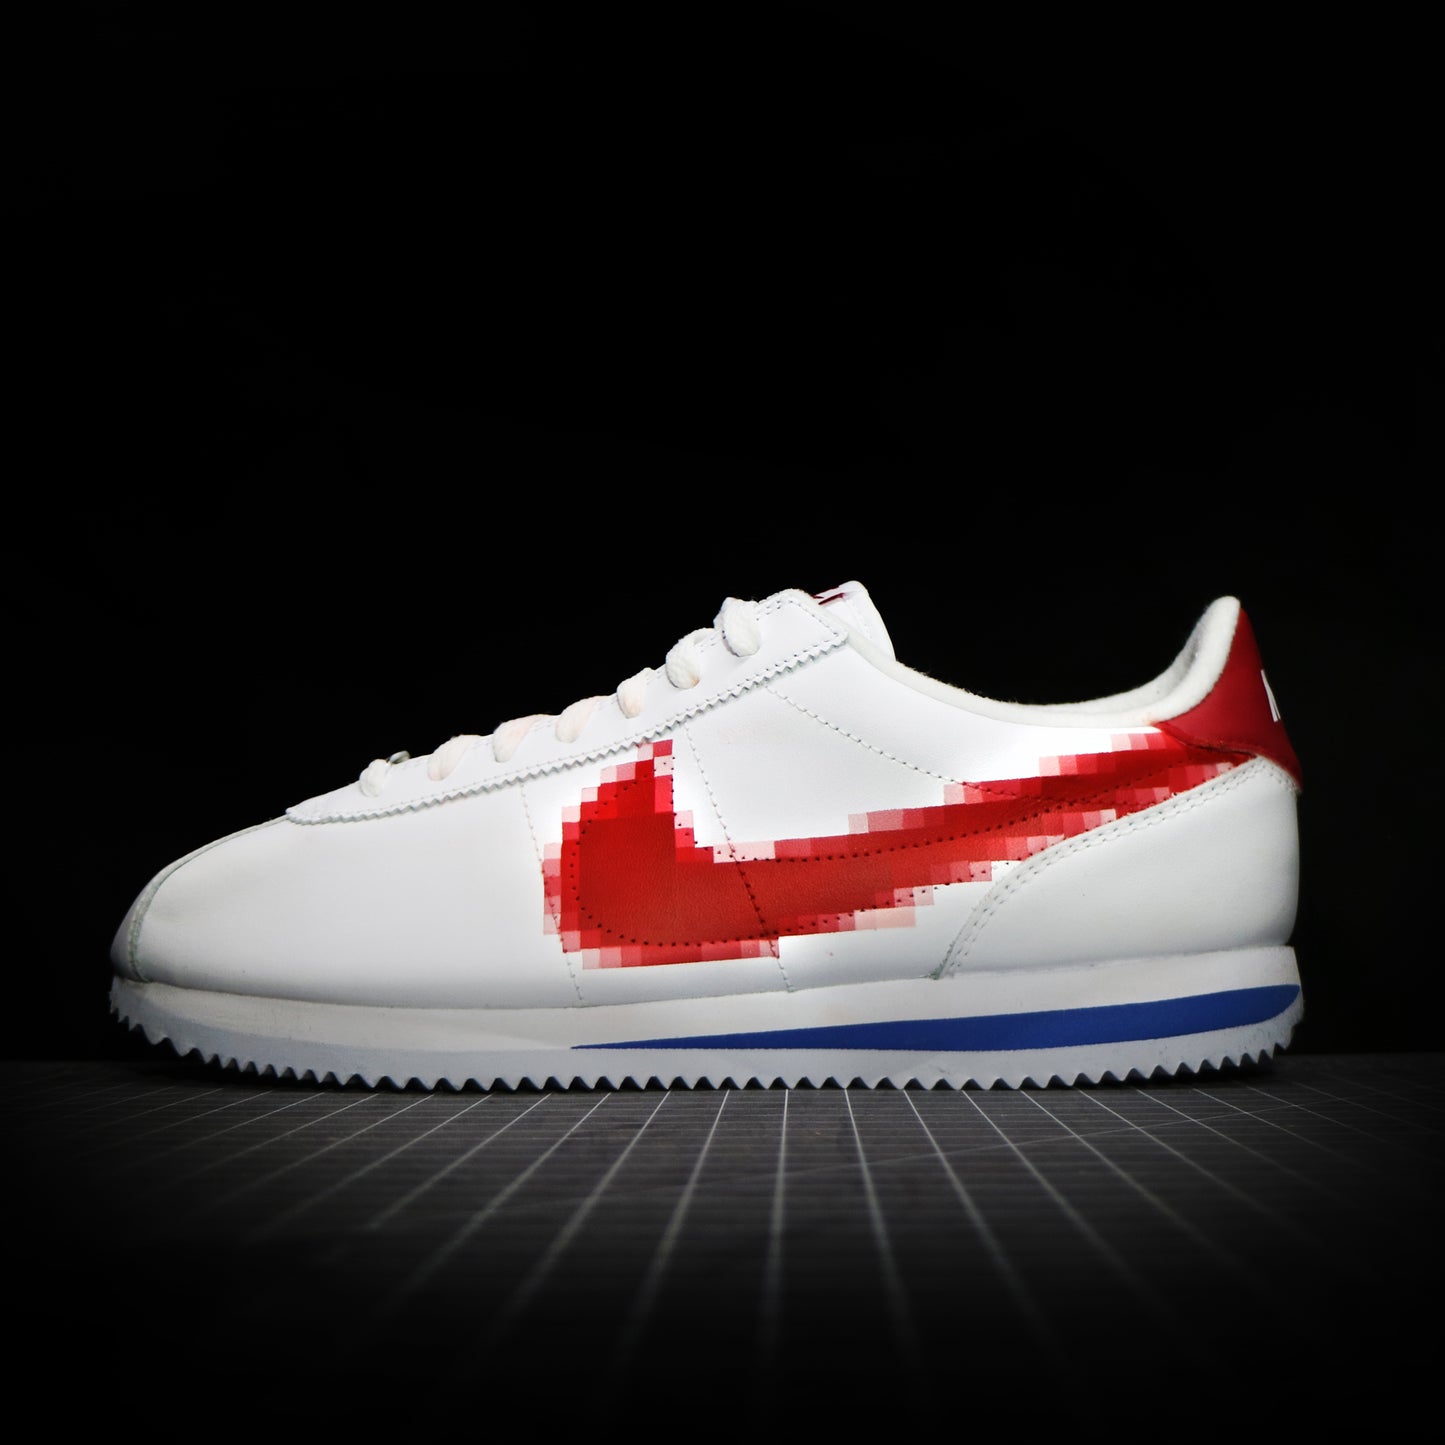 The Cortez Red Pixel